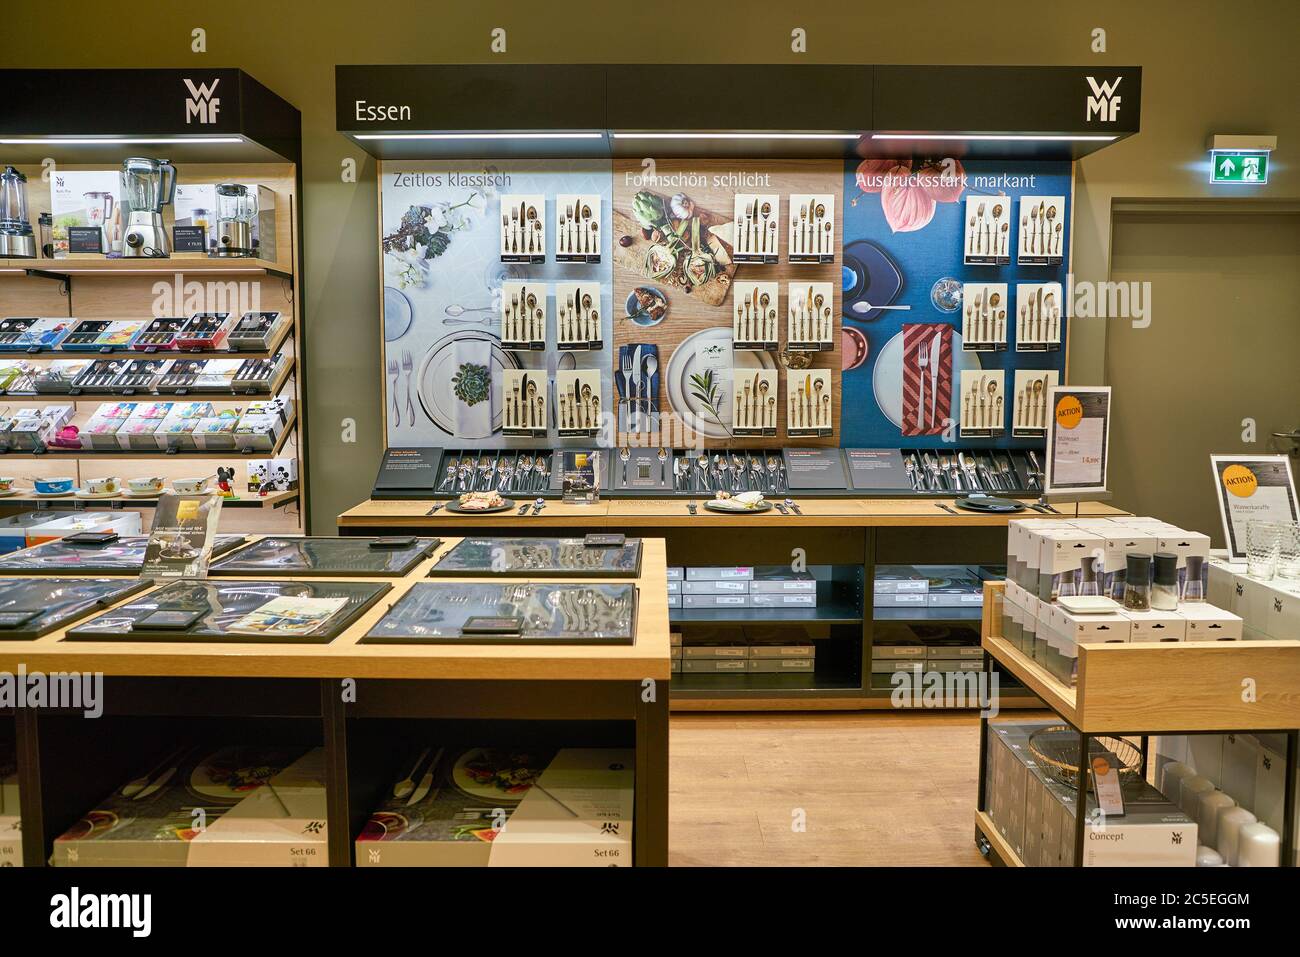 BERLIN, GERMANY - CIRCA SEPTEMBER, 2019: interior shot of WMF store in Mall  of Berlin. WMF Group is a German tableware manufacturer Stock Photo - Alamy